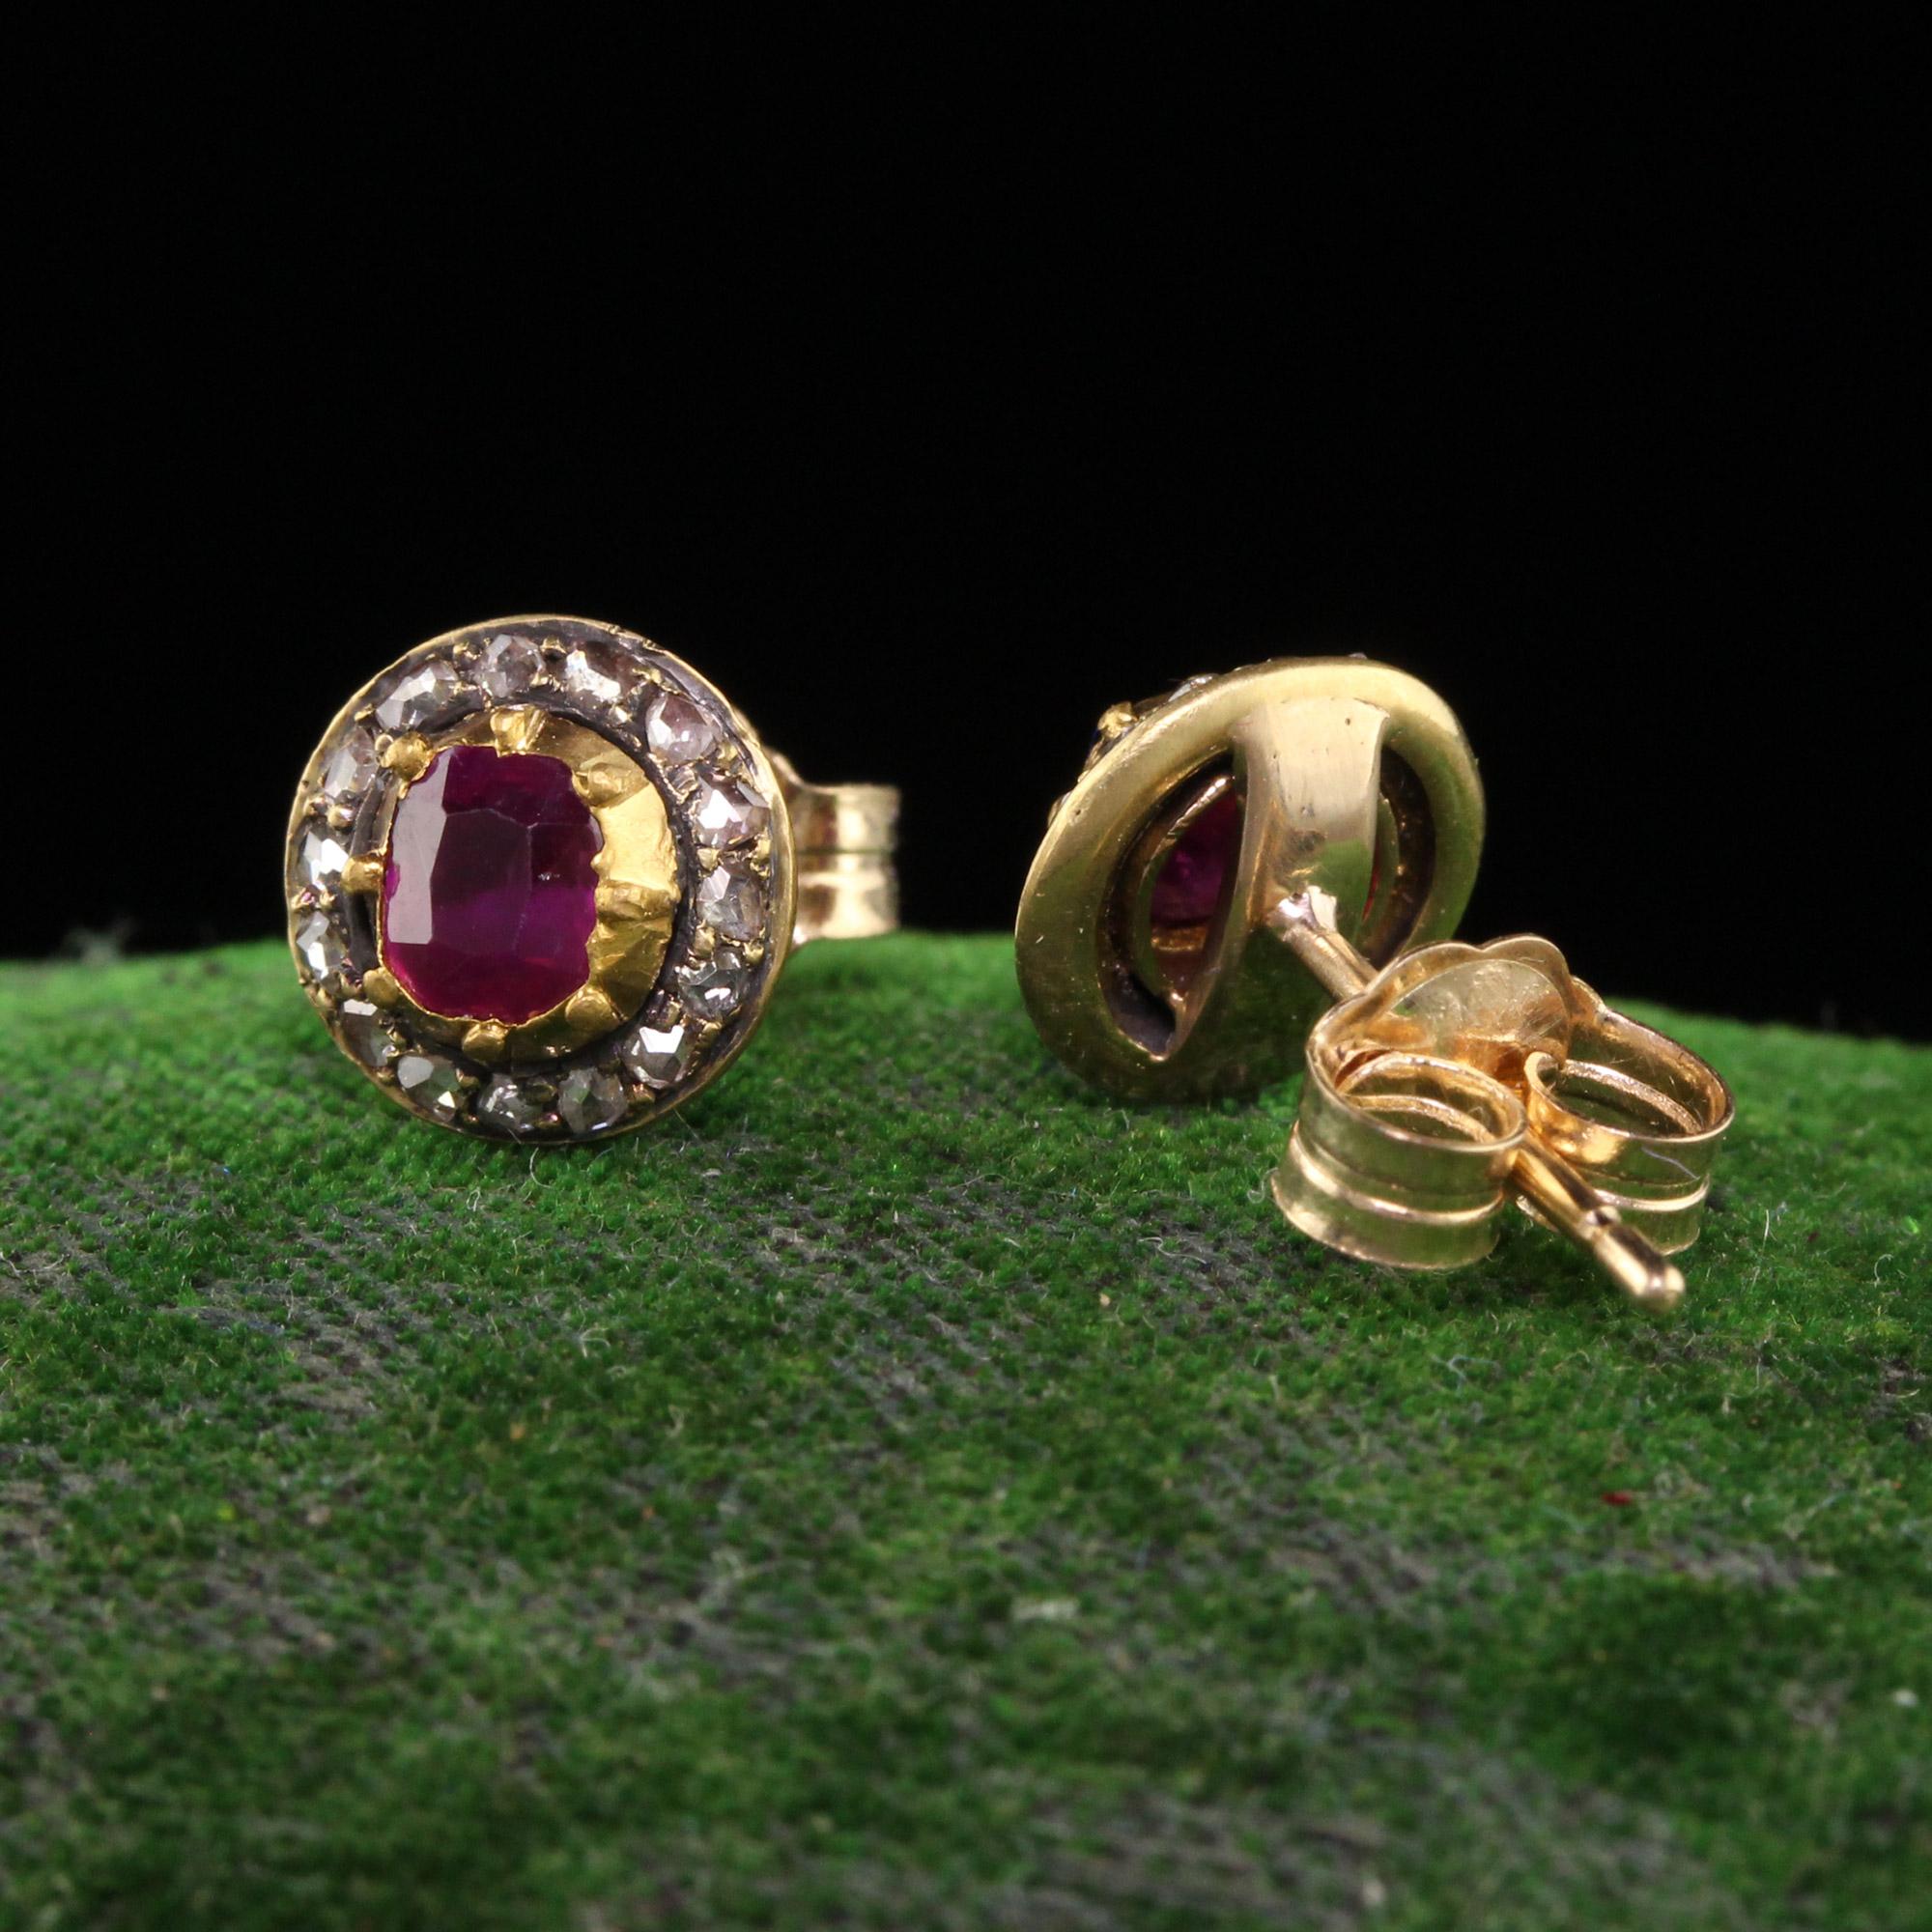 Old Mine Cut Antique Victorian 18k Yellow Gold Burma Ruby and Diamond Stud Earrings